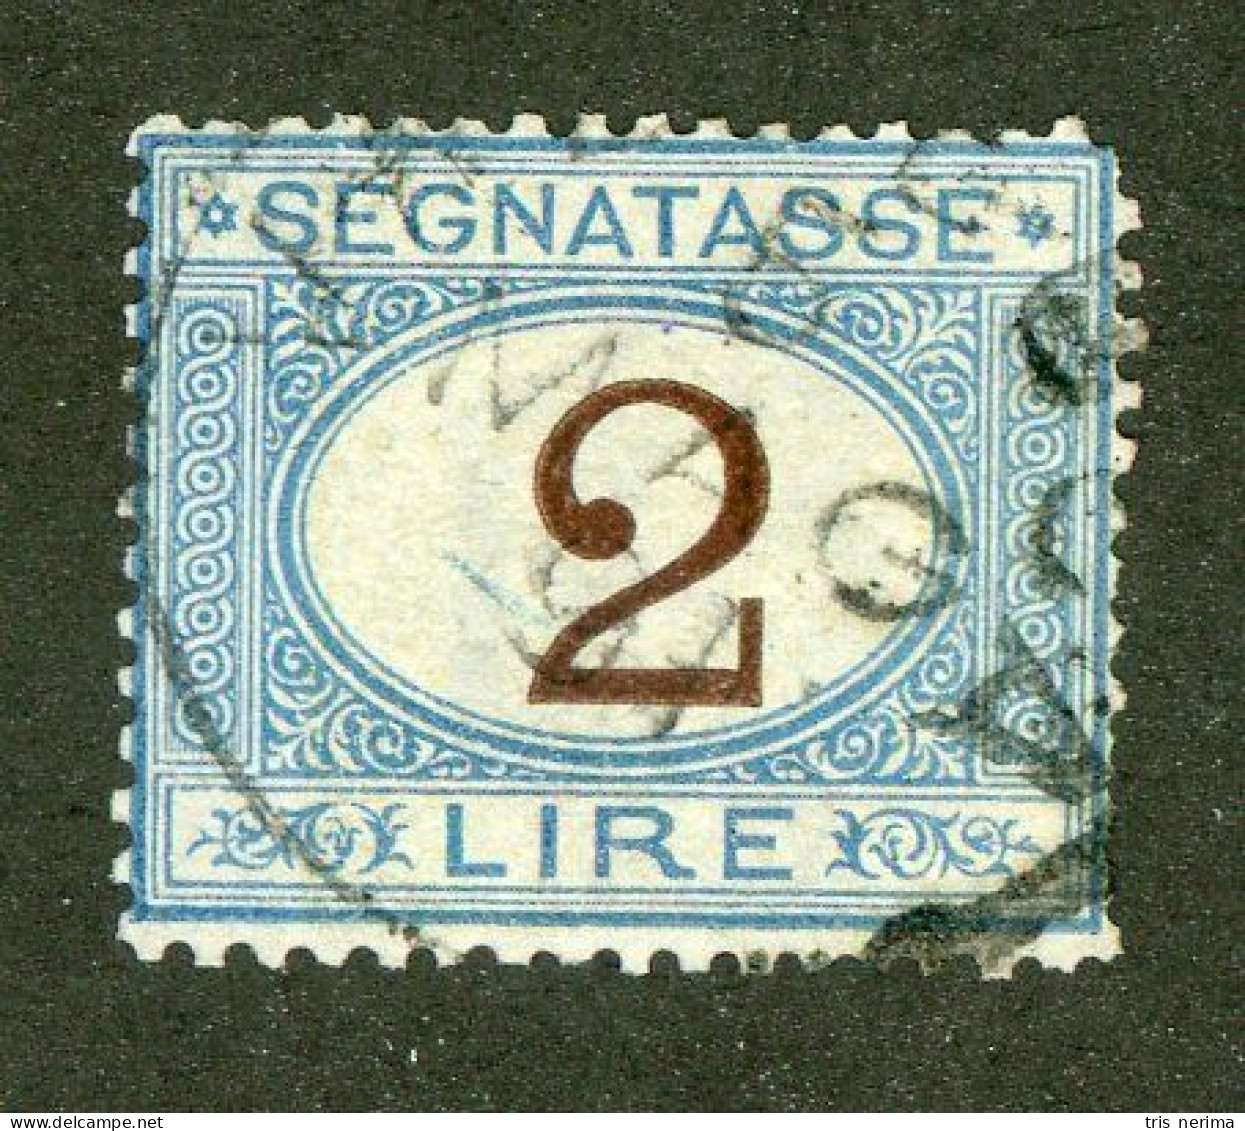 993 Italy 1870 Scott #J15 Used (Lower Bids 20% Off) - Postage Due